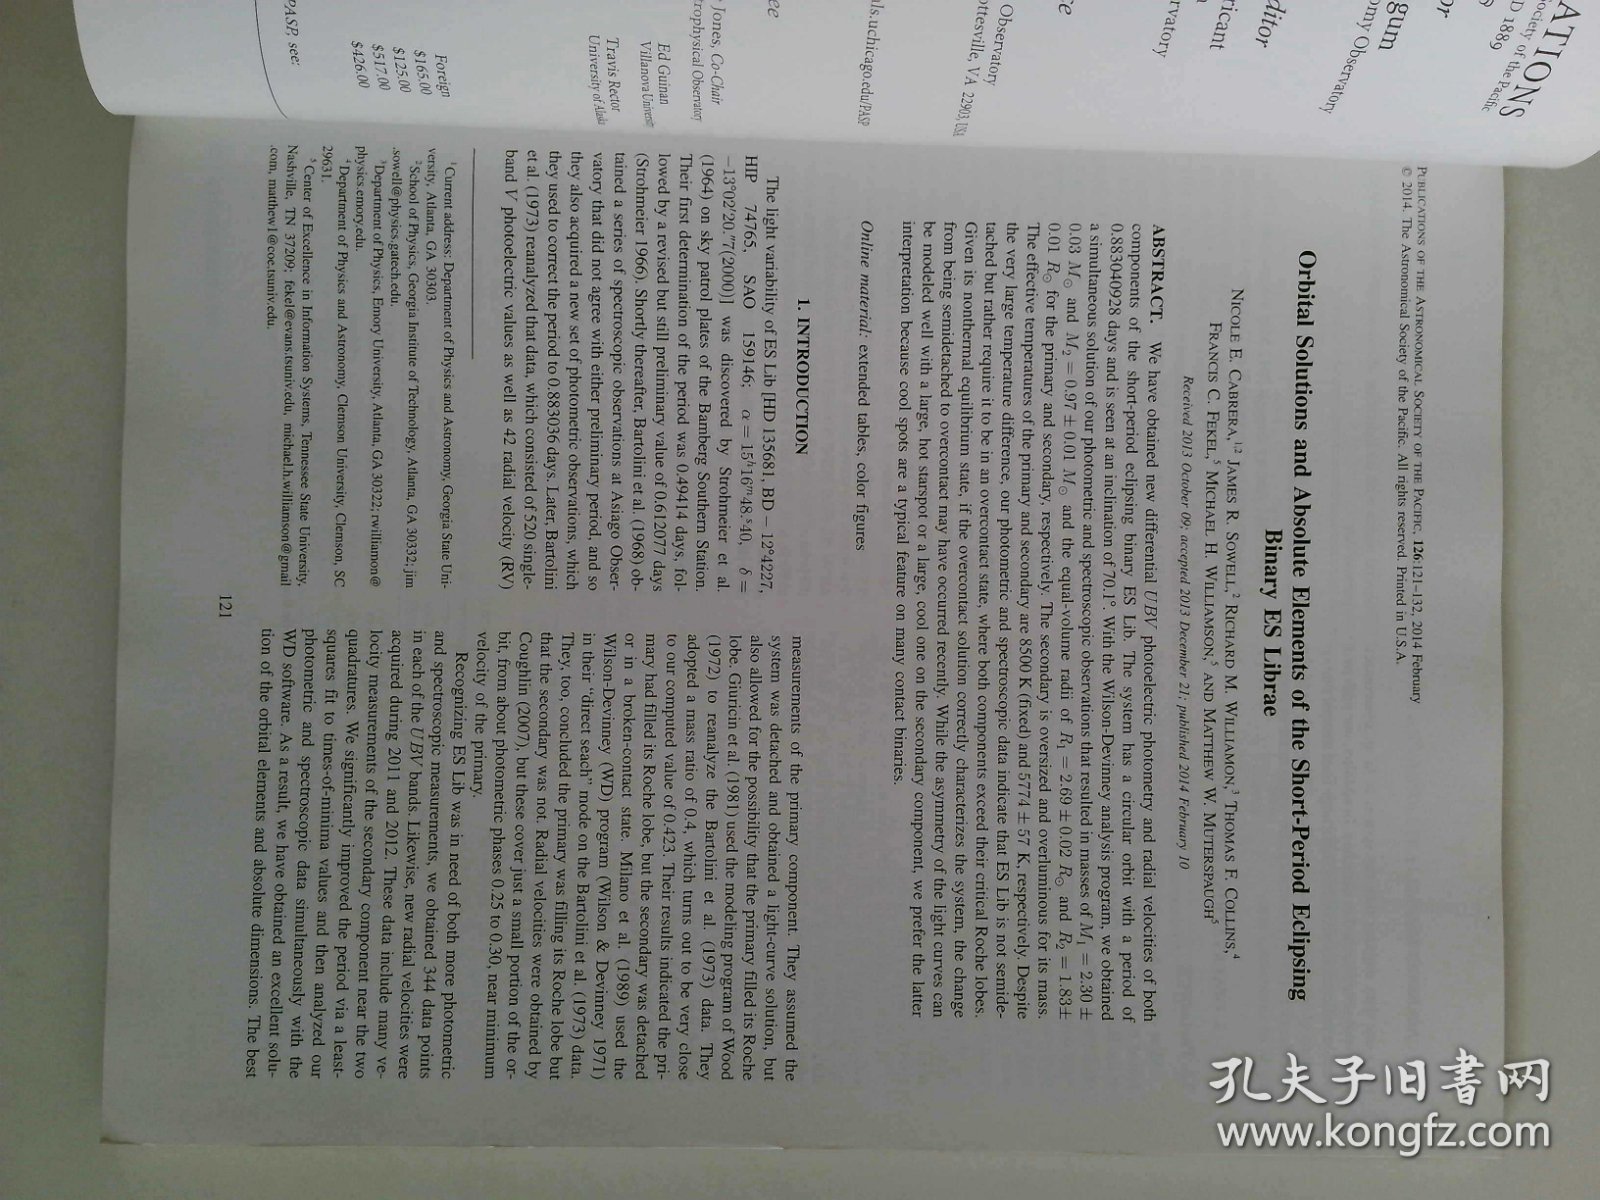 Publications of the Astronomical Society of the Pacific 02/2014 太平洋天文学会汇刊